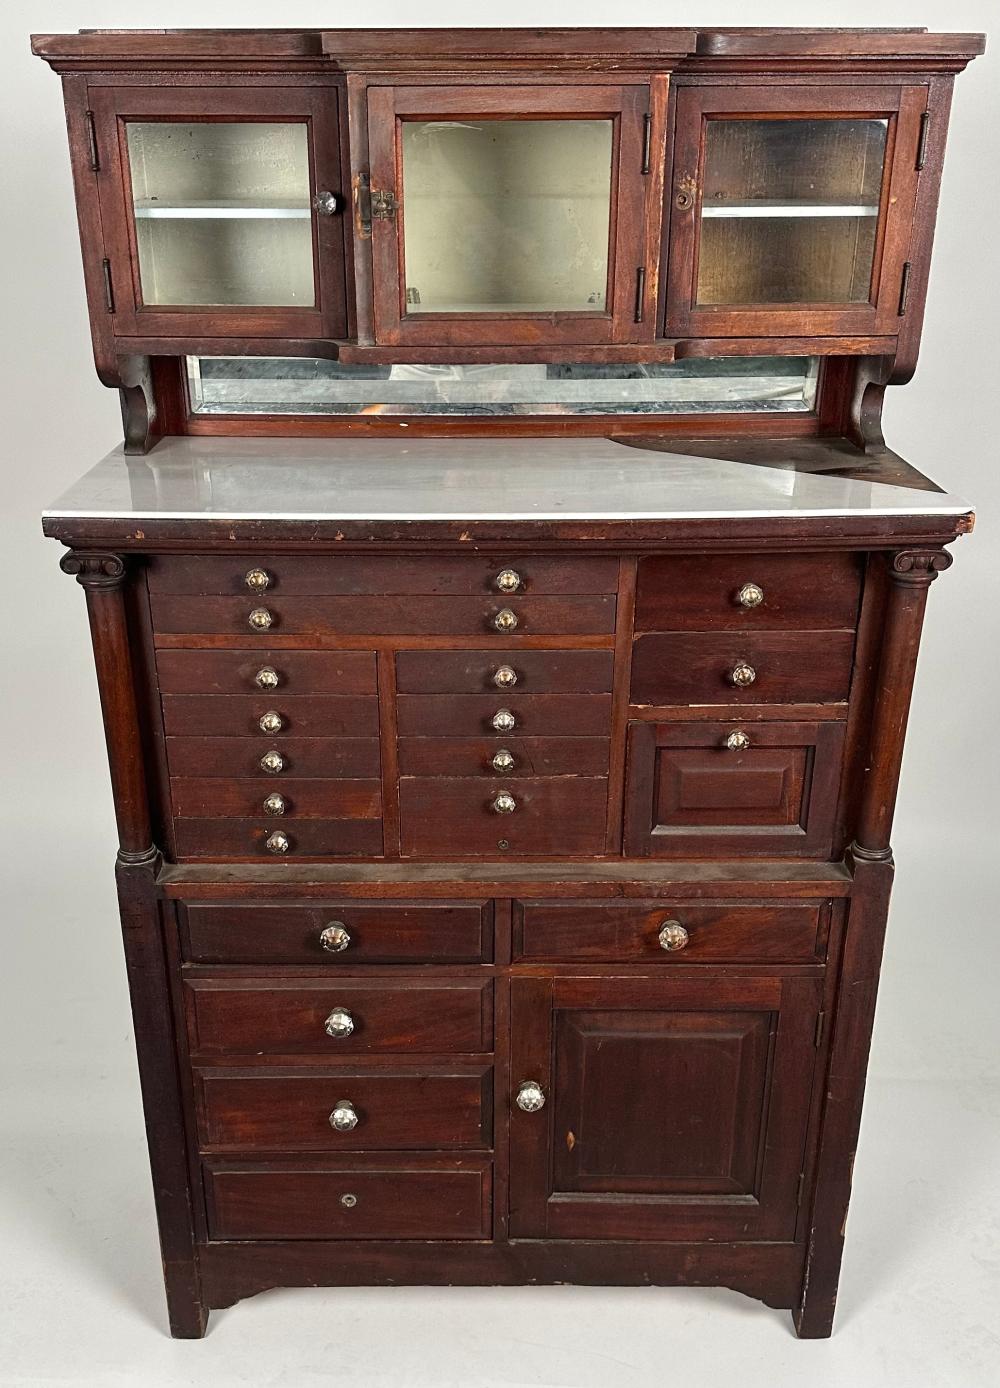 LATE VICTORIAN DENTAL CABINET EARLY 2f23e7